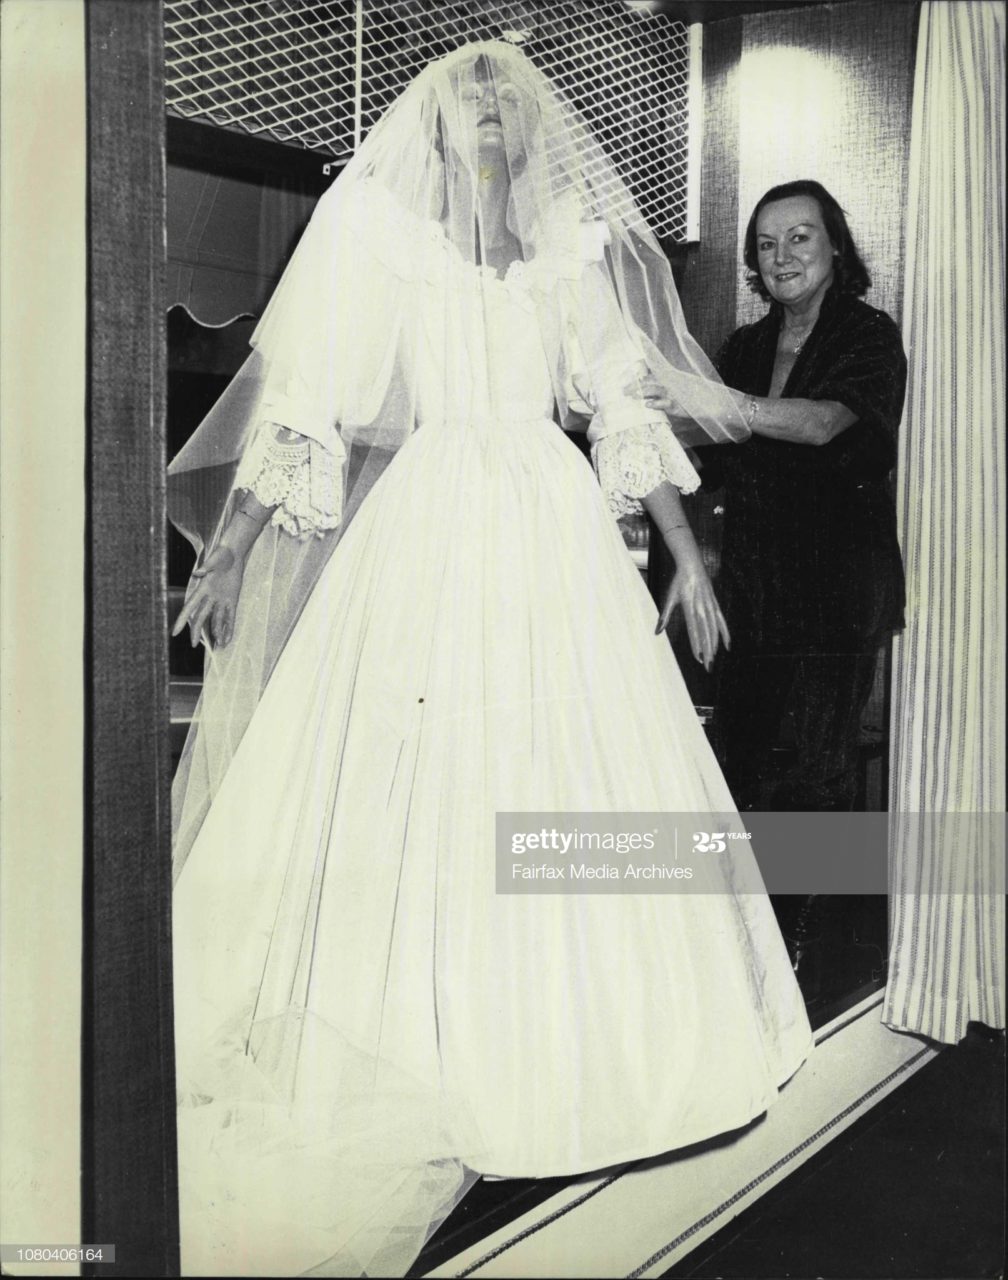 Boutique owner and designer Miss Brown of double bay with her replica of the wedding dress worn by the Princess of Wales, Lady Diana Spencer